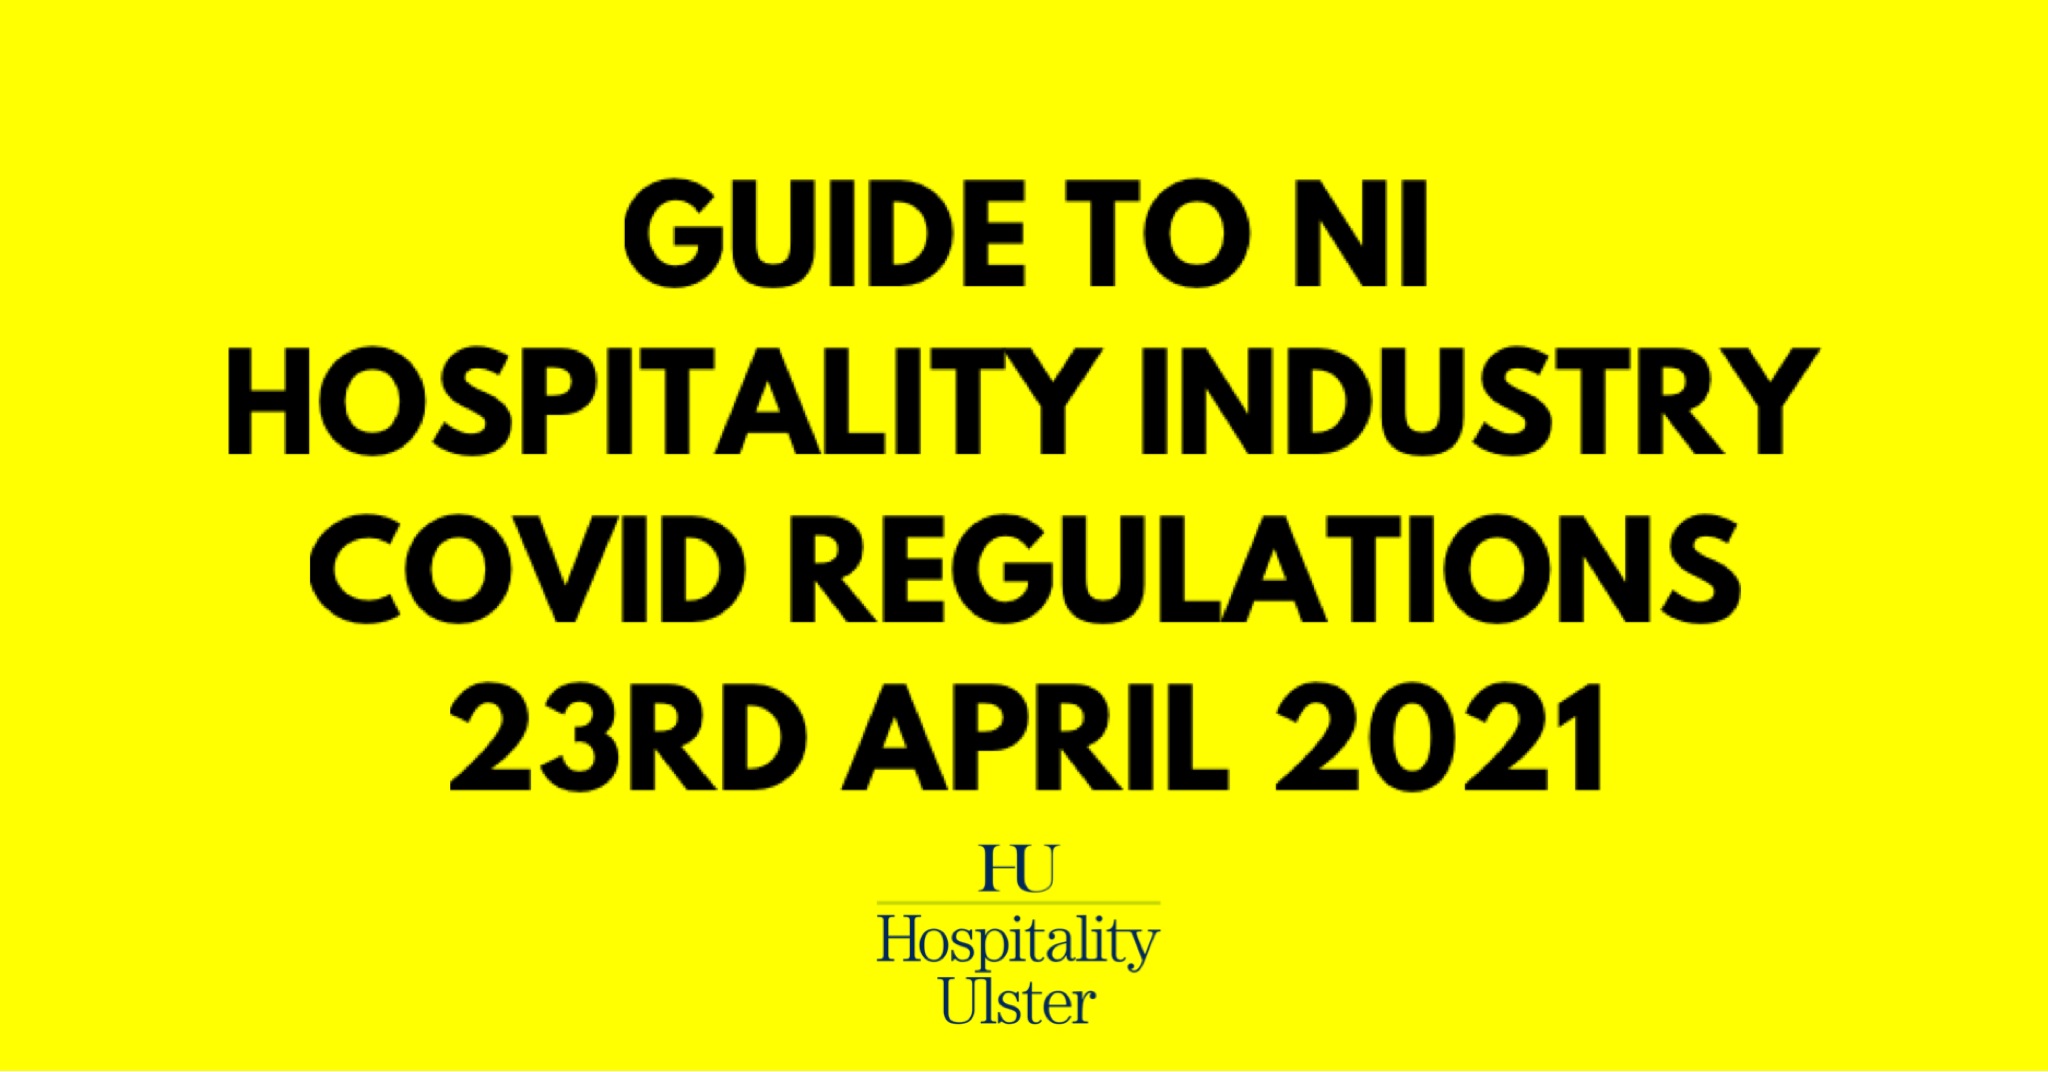 GUIDE TO NI HOSPITALITY INDUSTRY COVID REGS